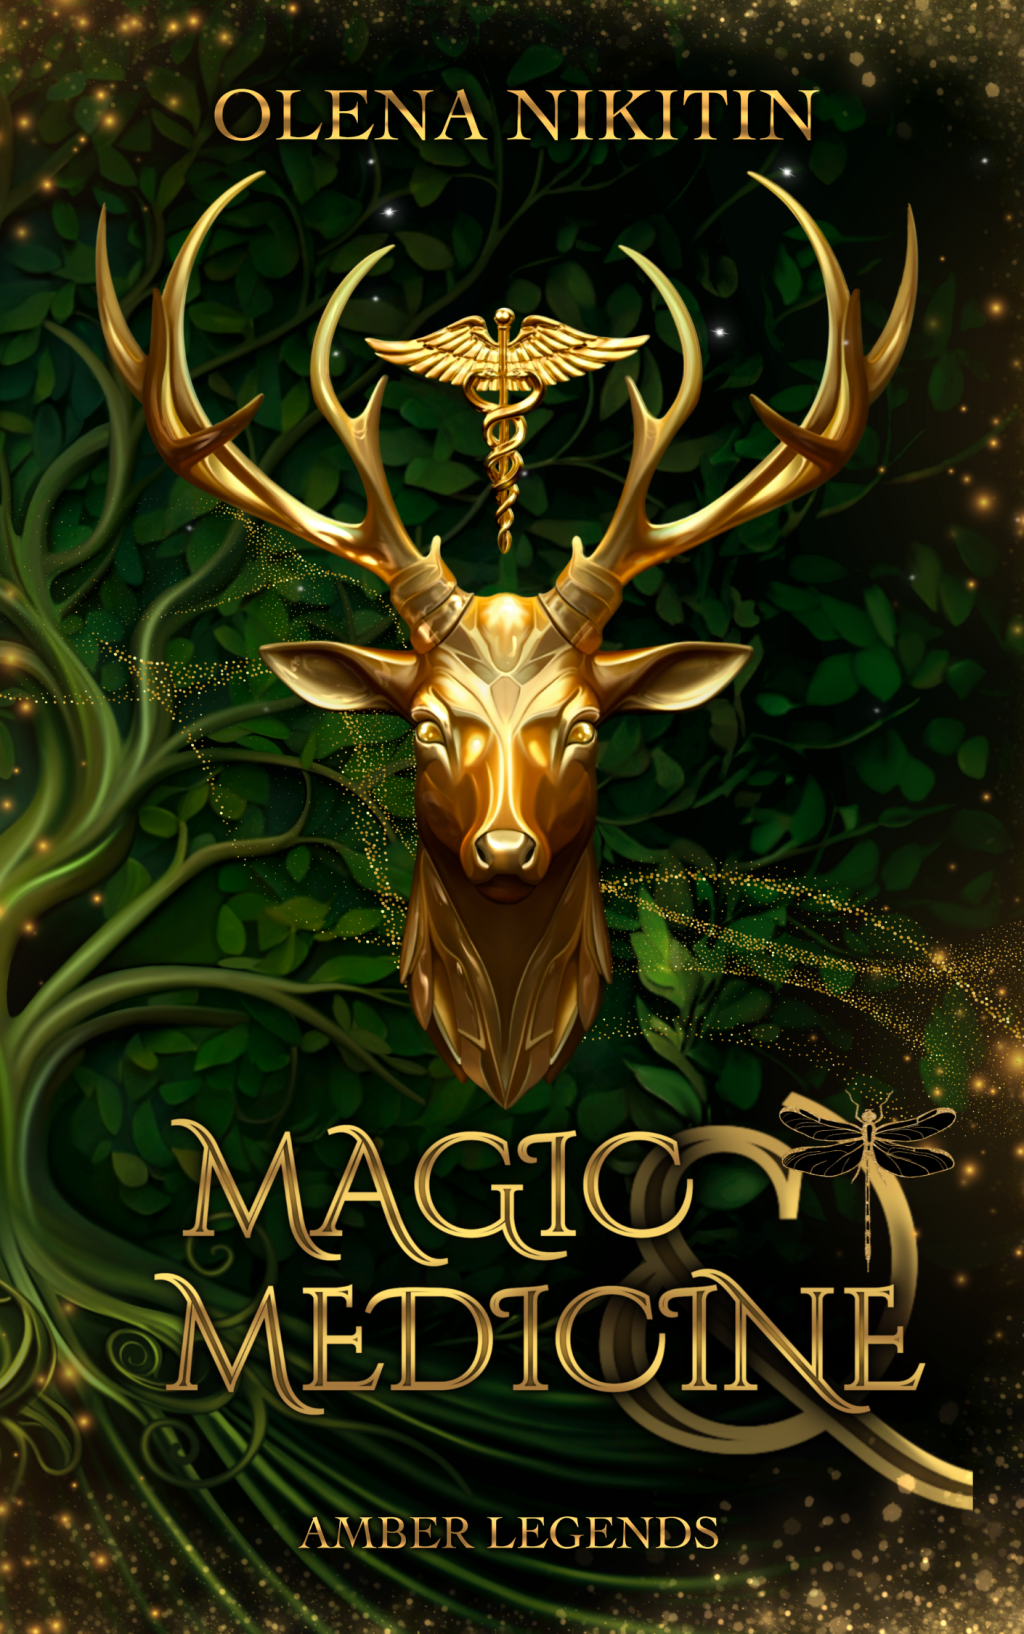 COVER/BOOK REVEAL: MAGIC AND MEDICINE BY OLENA NIKITIN